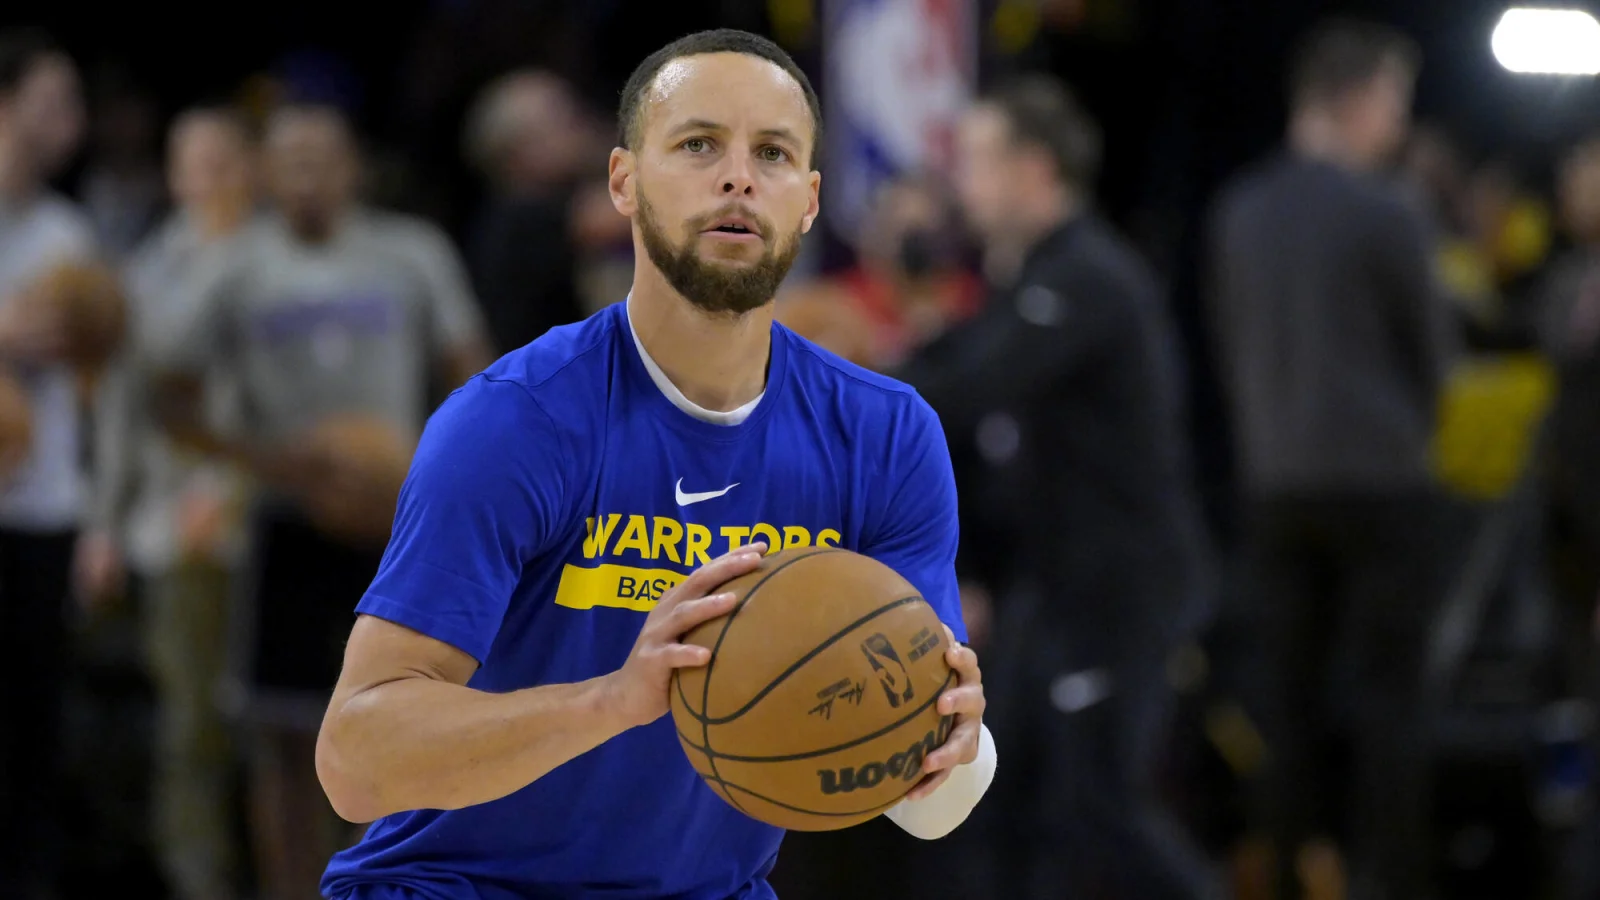 Warriors urged to “Do Right” by Stephen Curry